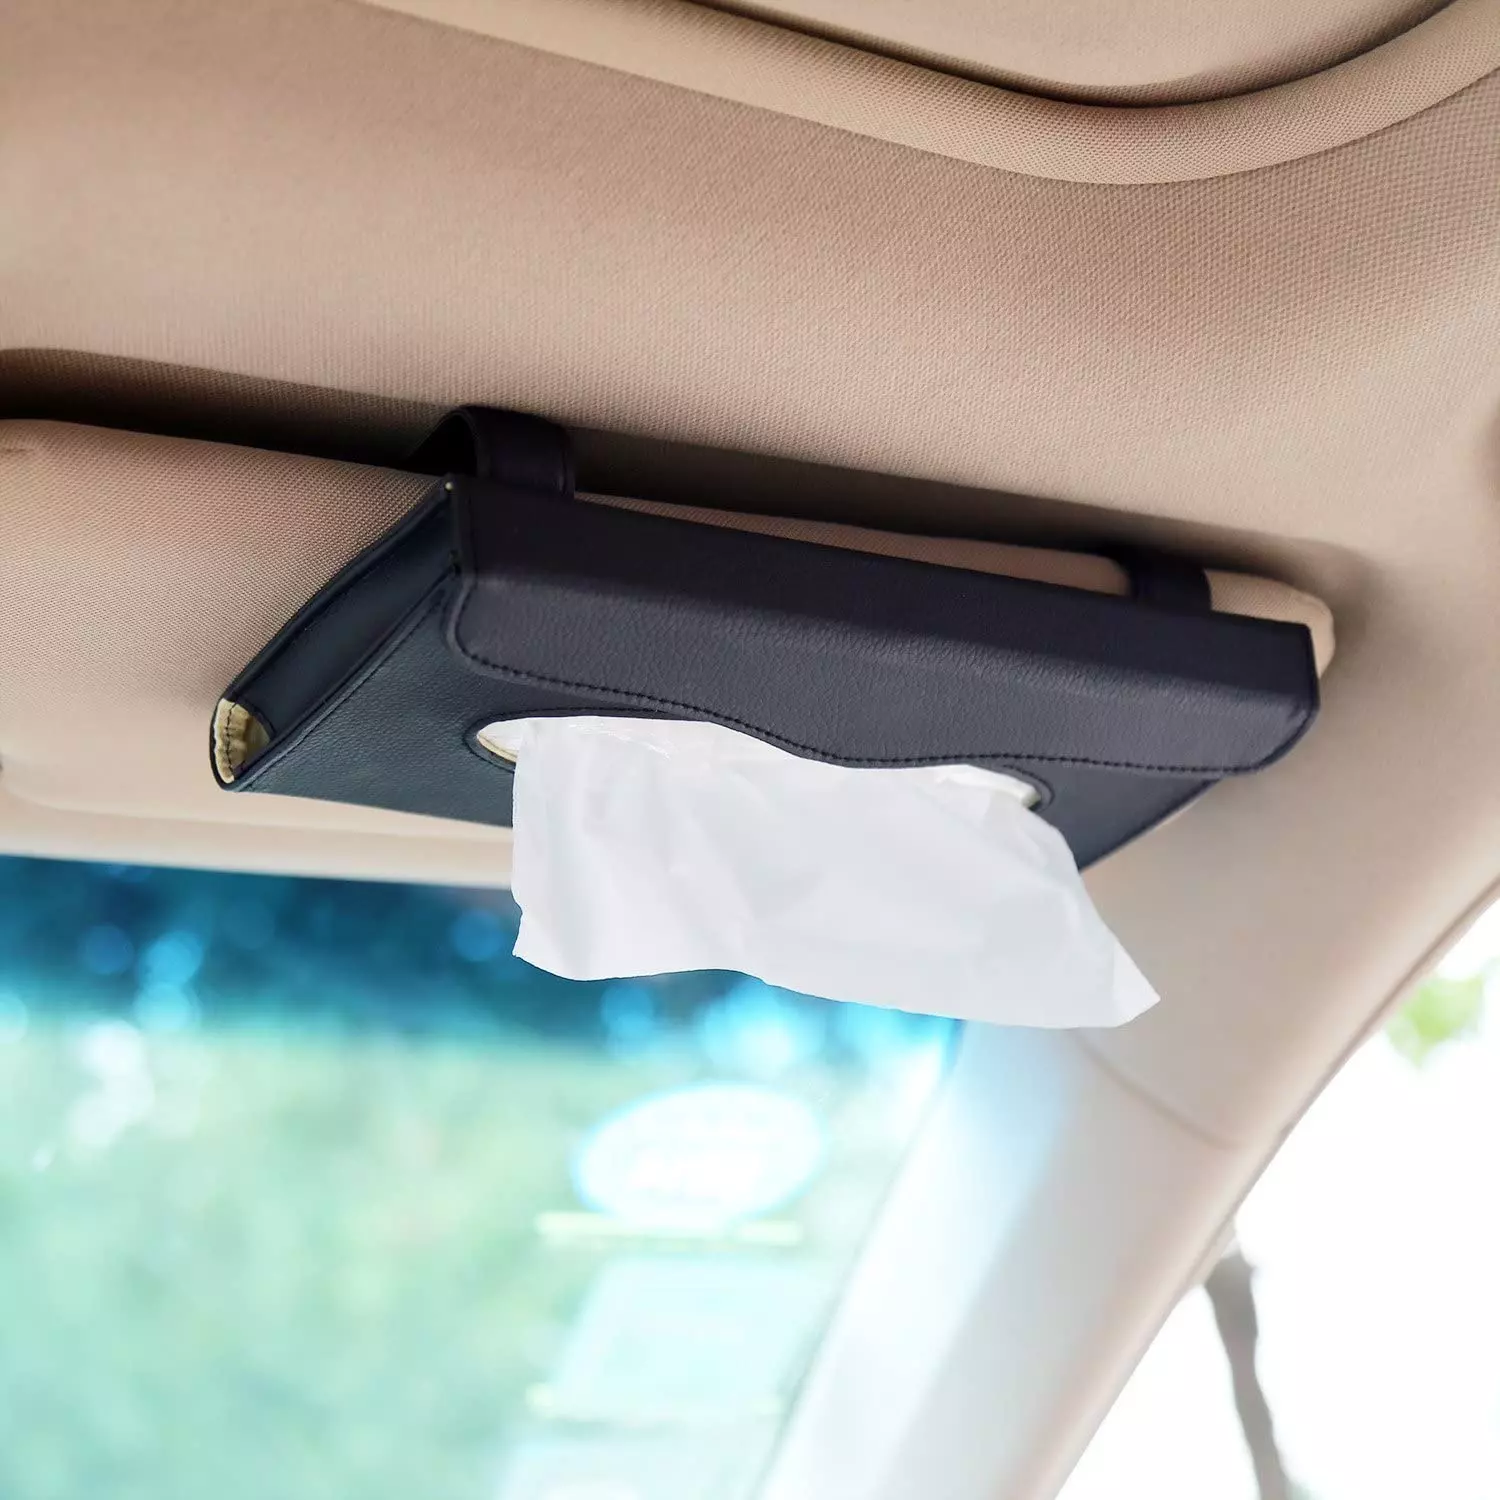 The Best Car Tissue Holders (Review) in 2021